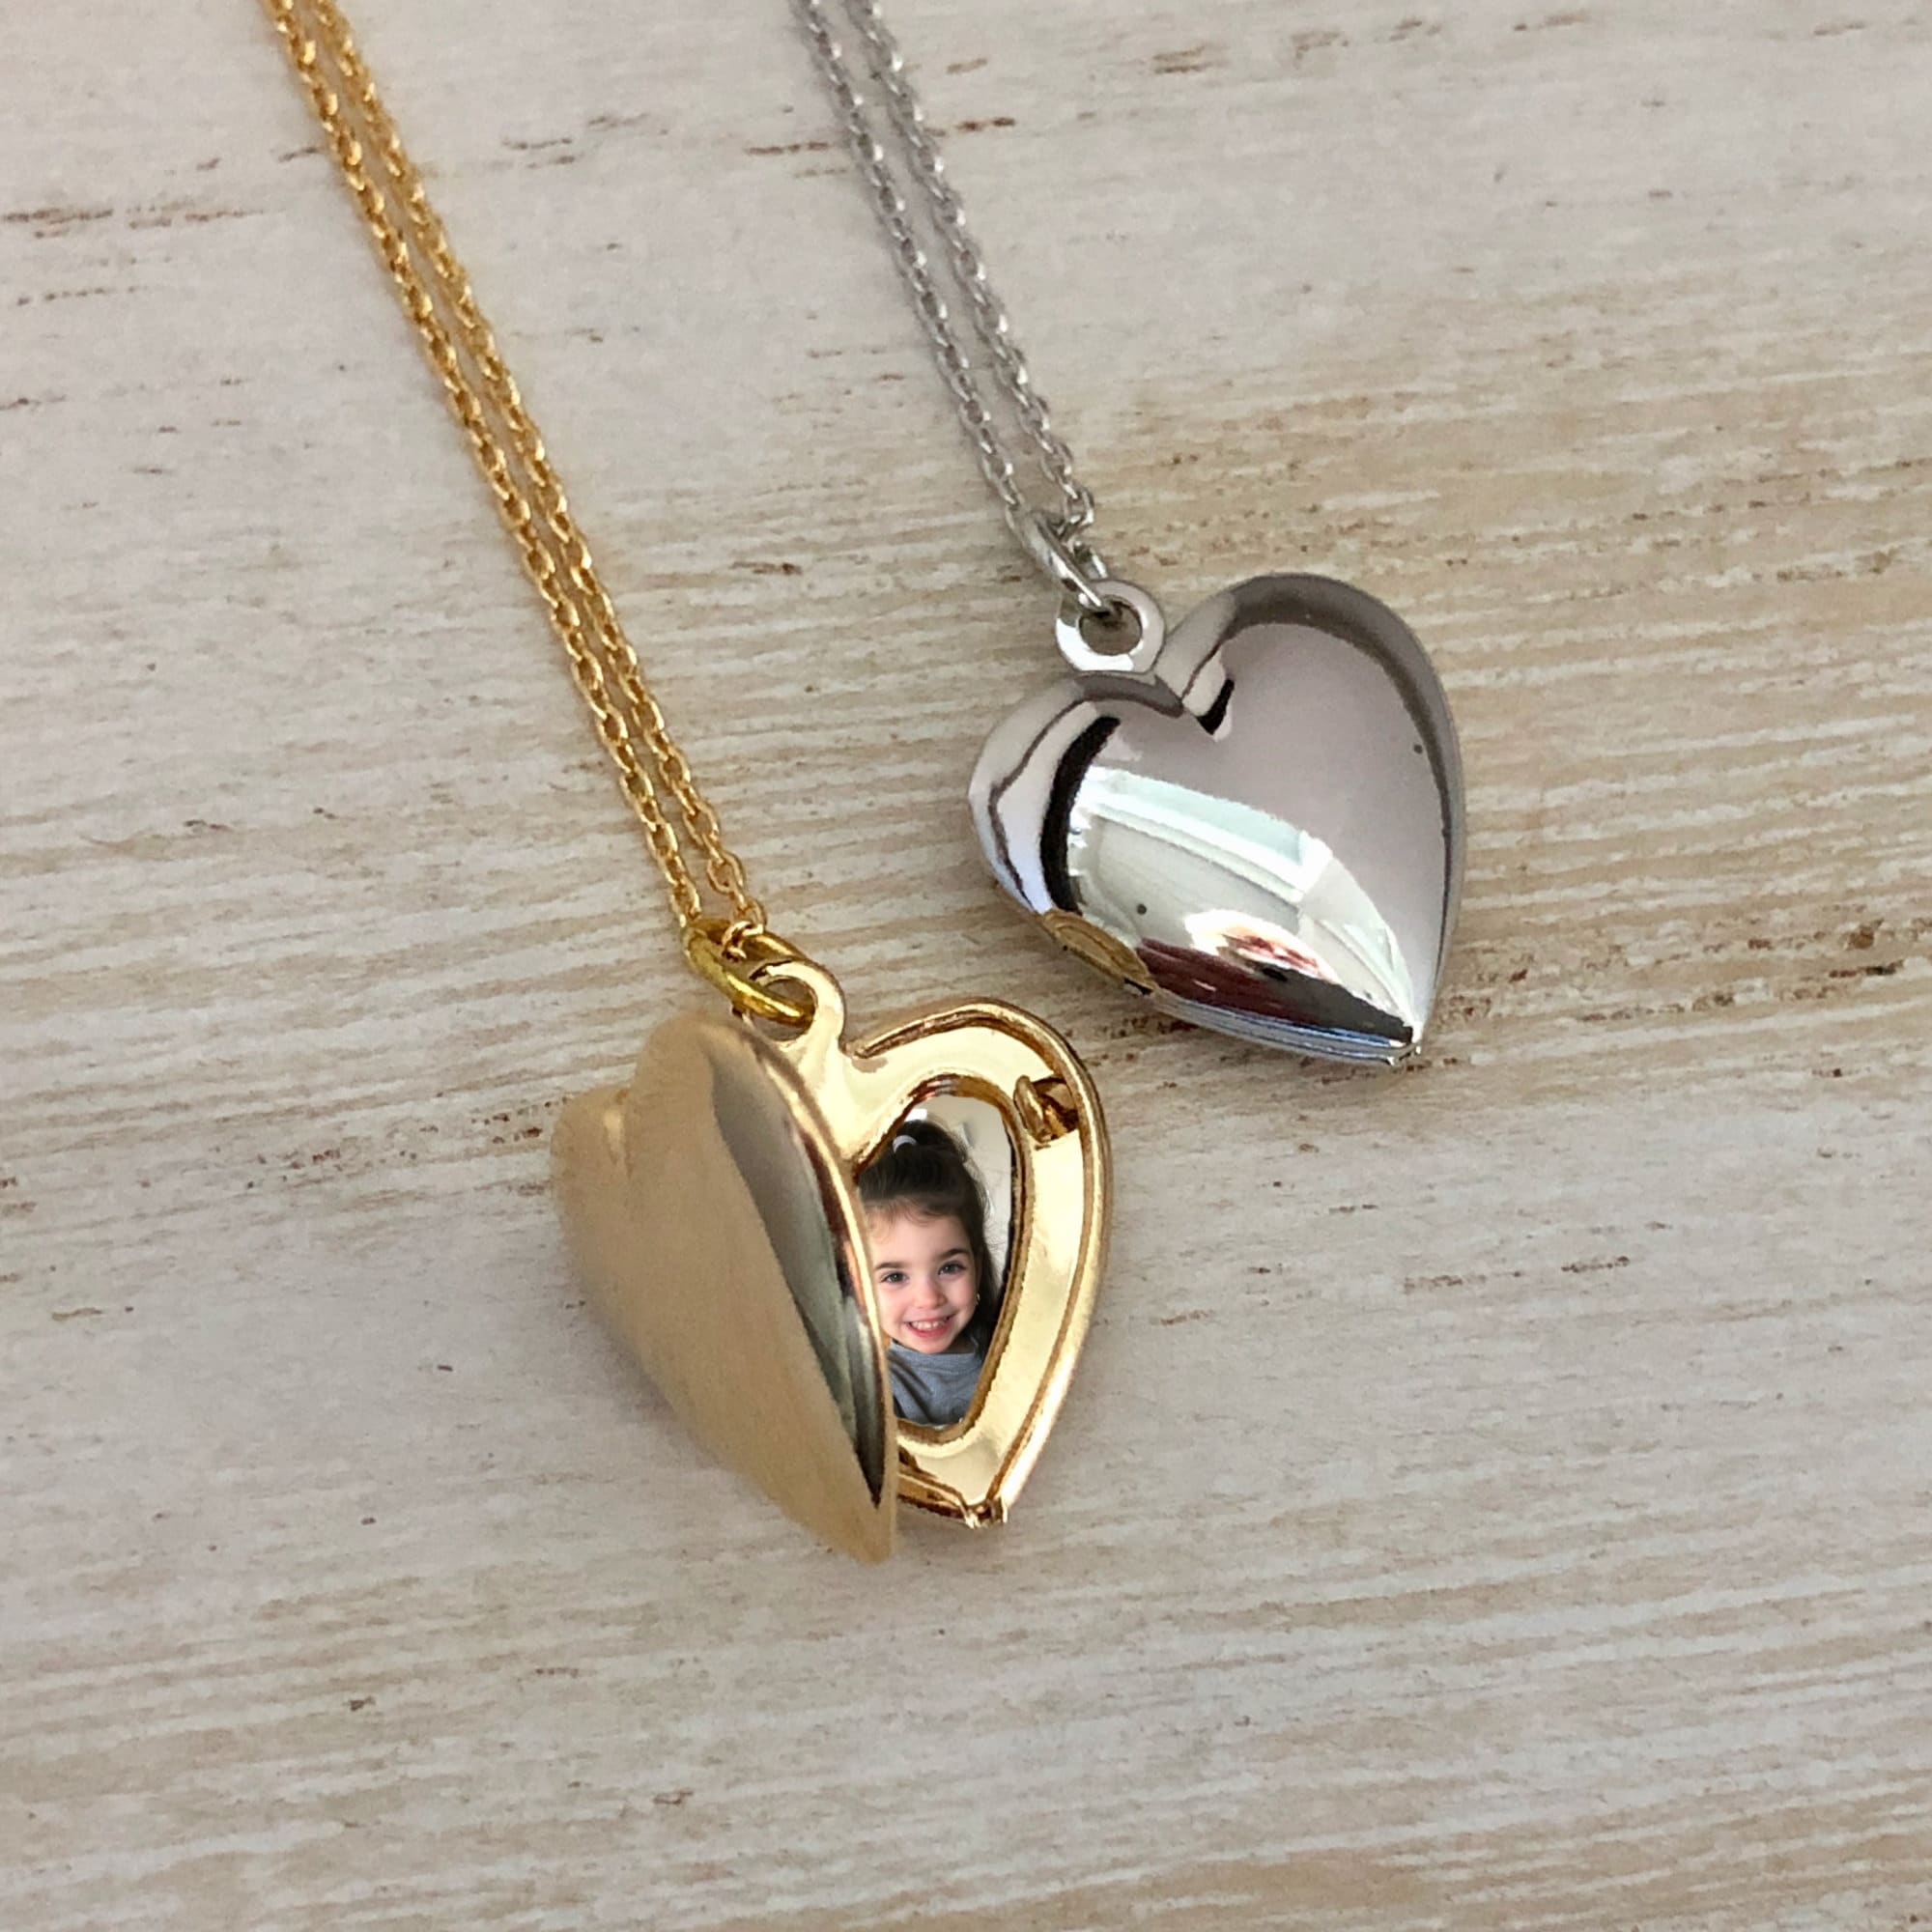 My Favorite Place Picture Frame Pendant Necklace